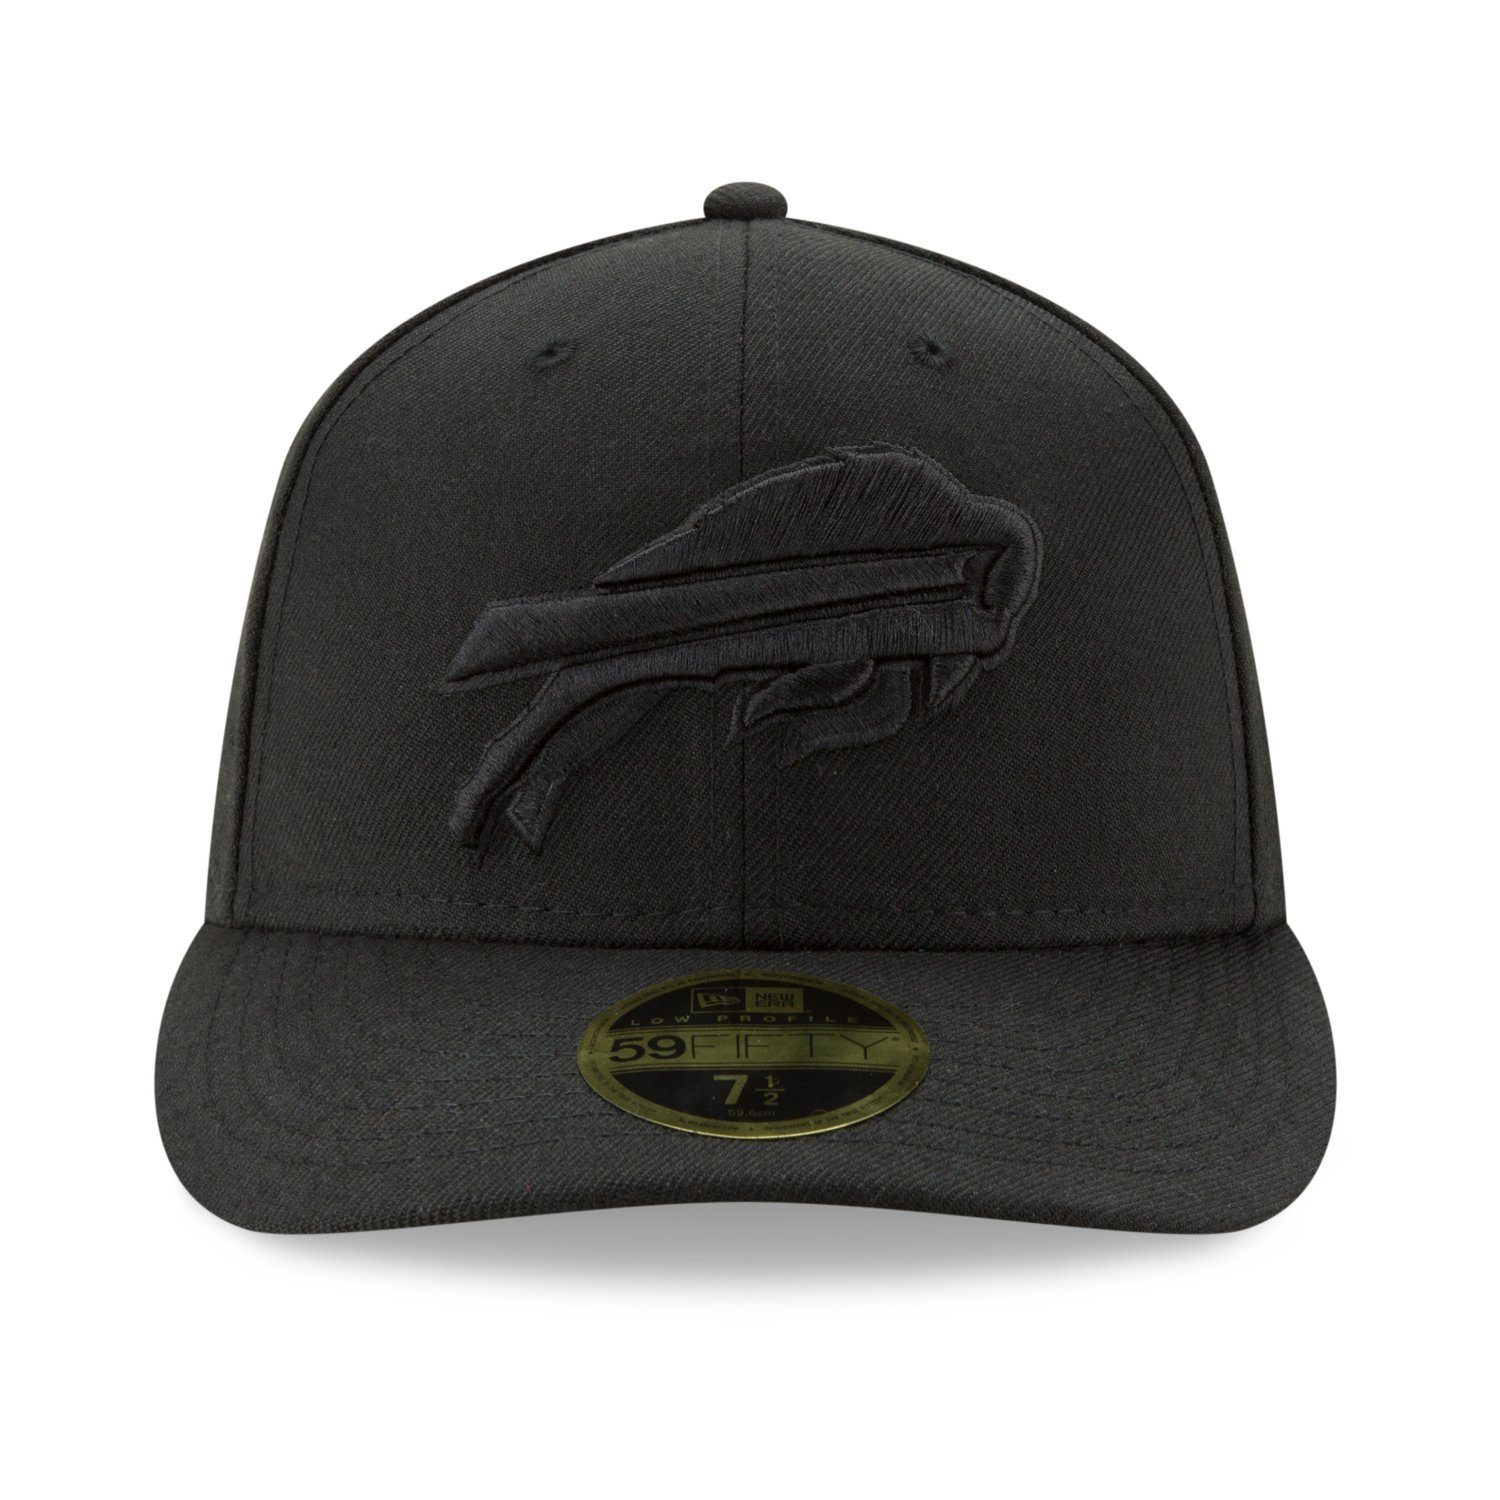 New Profile Era 59Fifty NFL Cap Buffalo Low Fitted Teams Bills